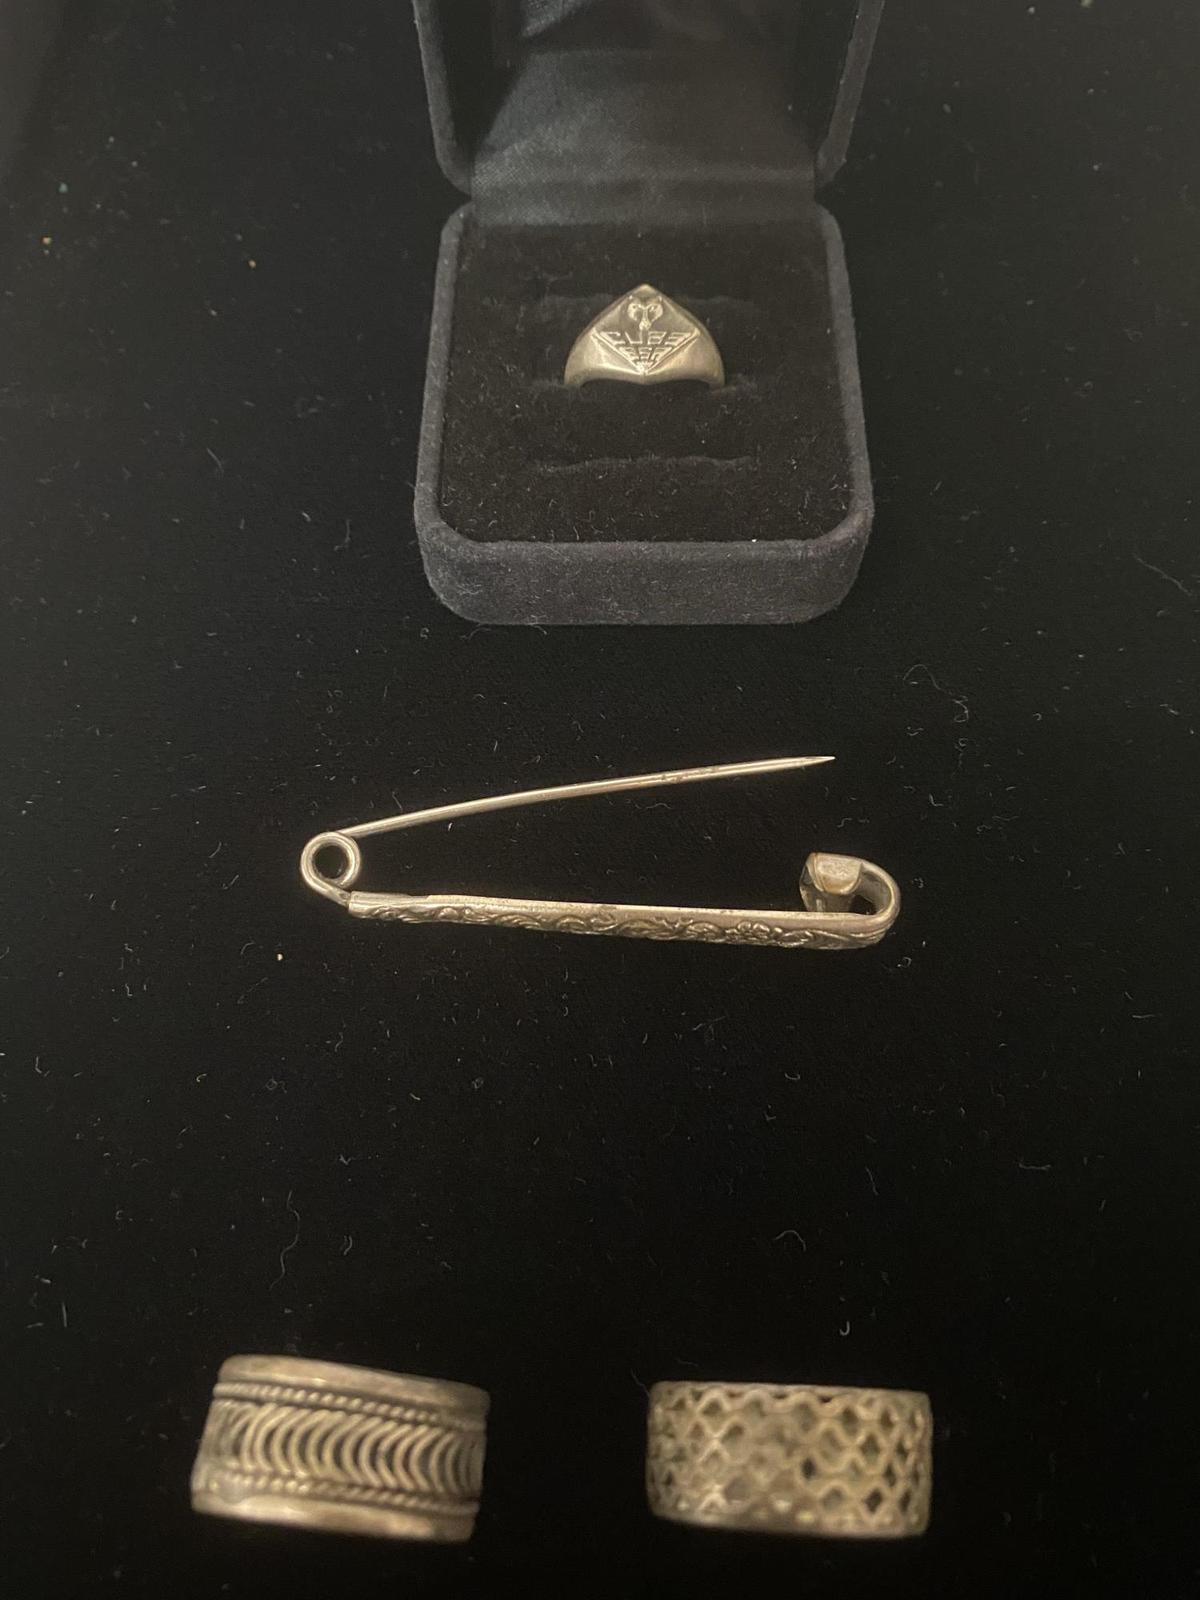 4 PIECES OF STERLING JEWELRY